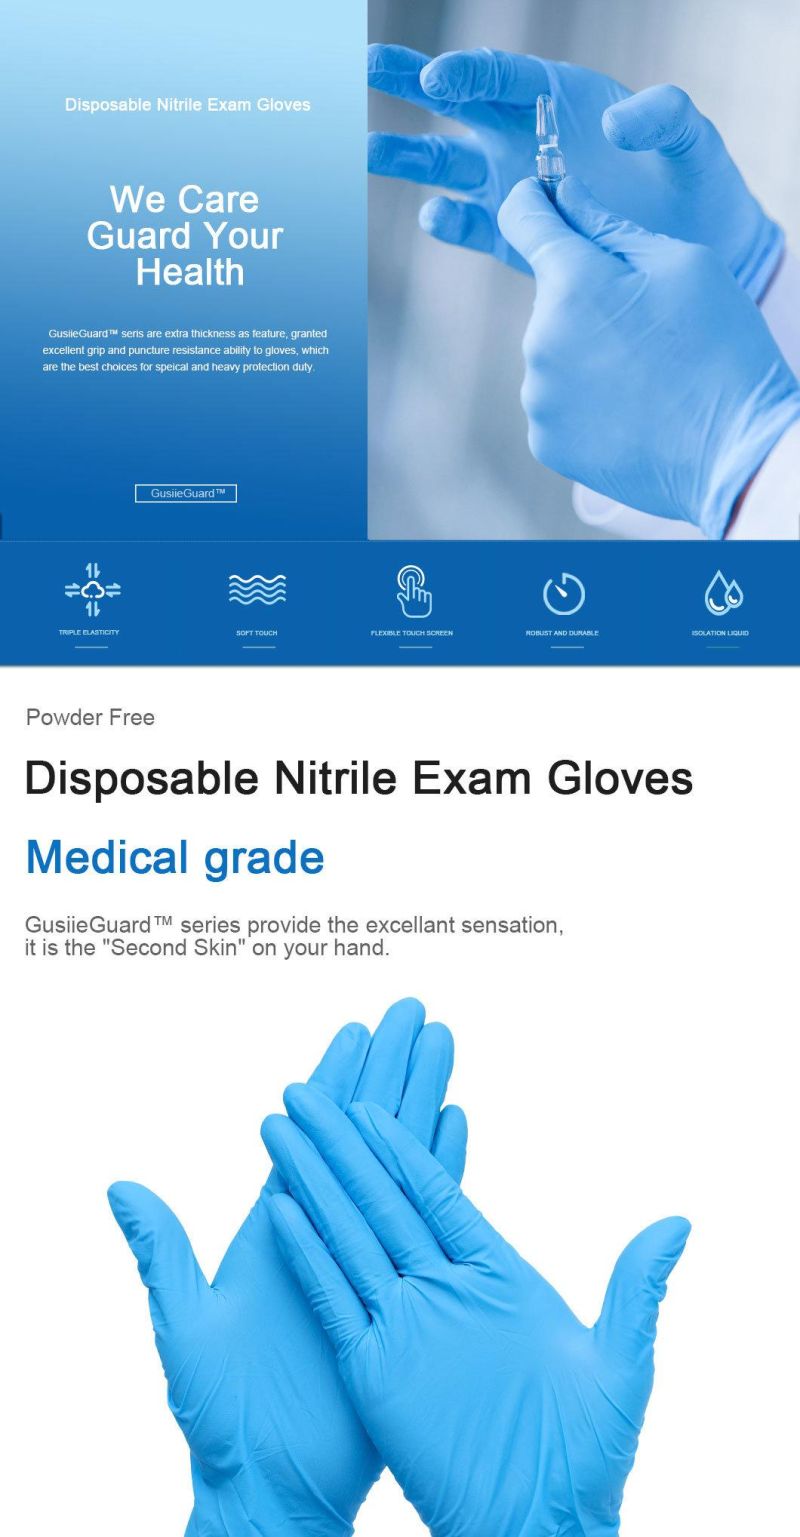 Gusiie High Quality Wholesale Nitrile Materials Disposable Gloves